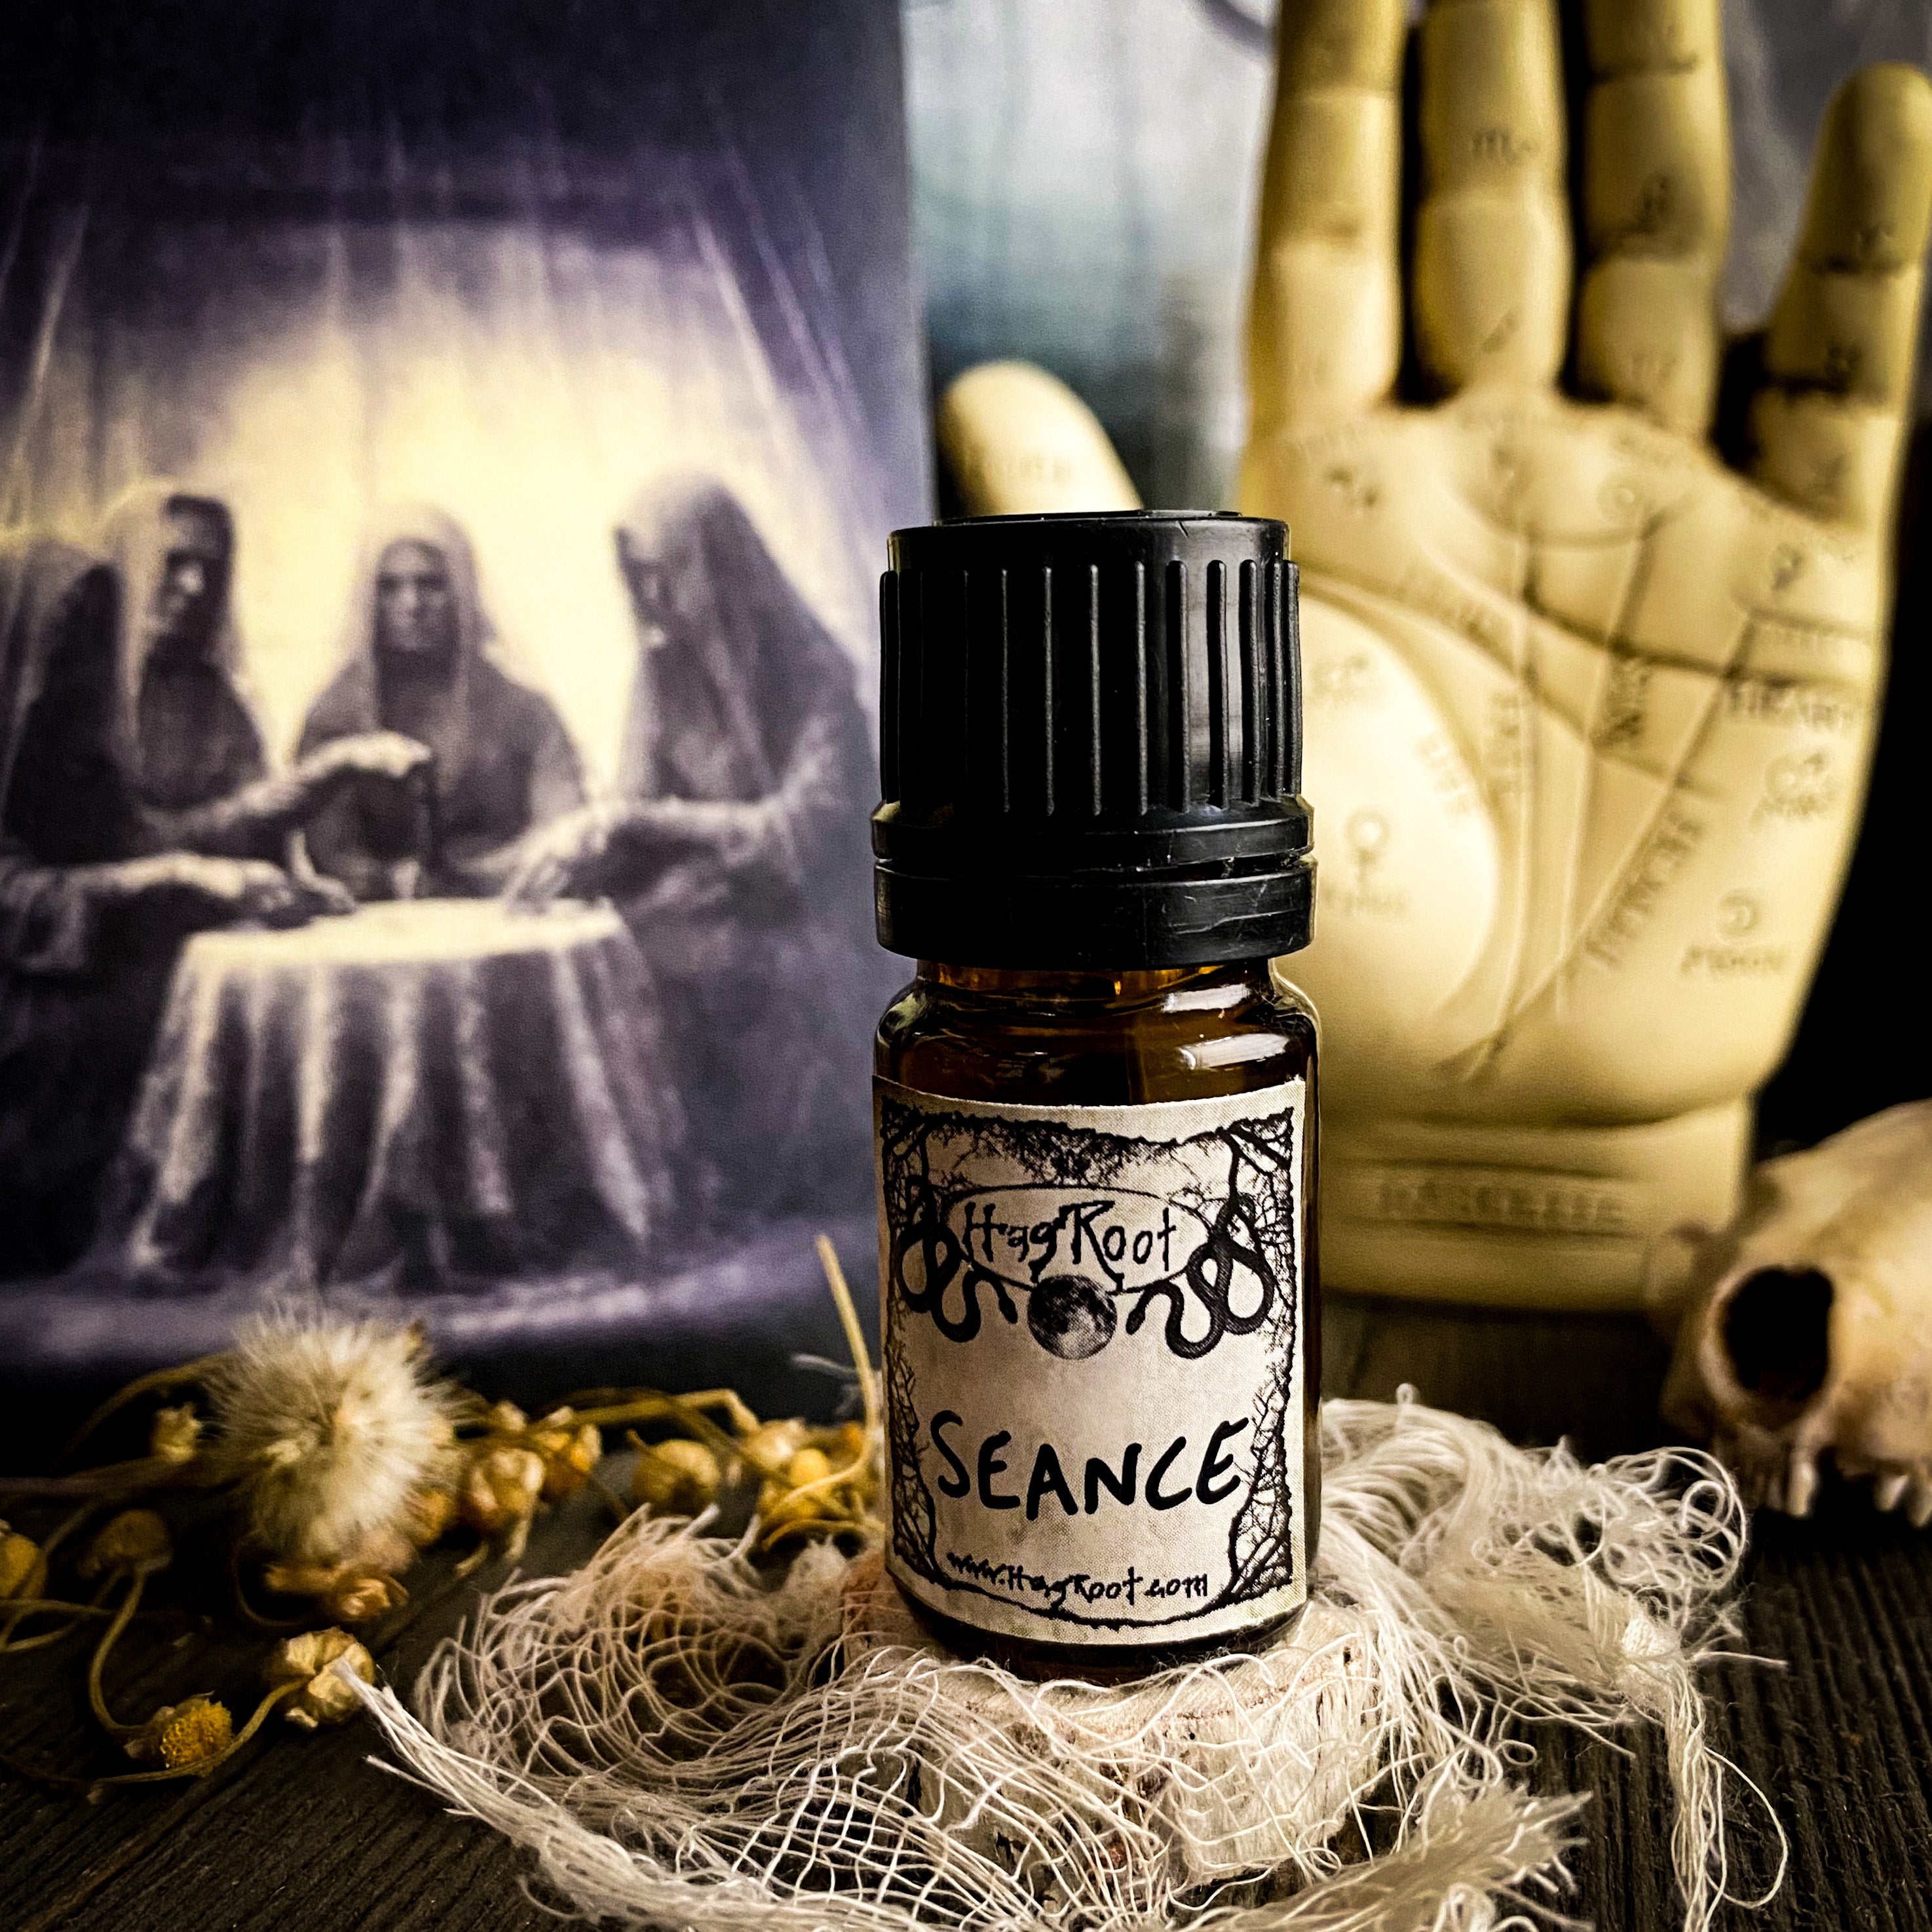 SÉANCE-(Incense, Old Books, Sweet Offerings, Coffee)-Perfume, Cologne, Anointing, Ritual Oil